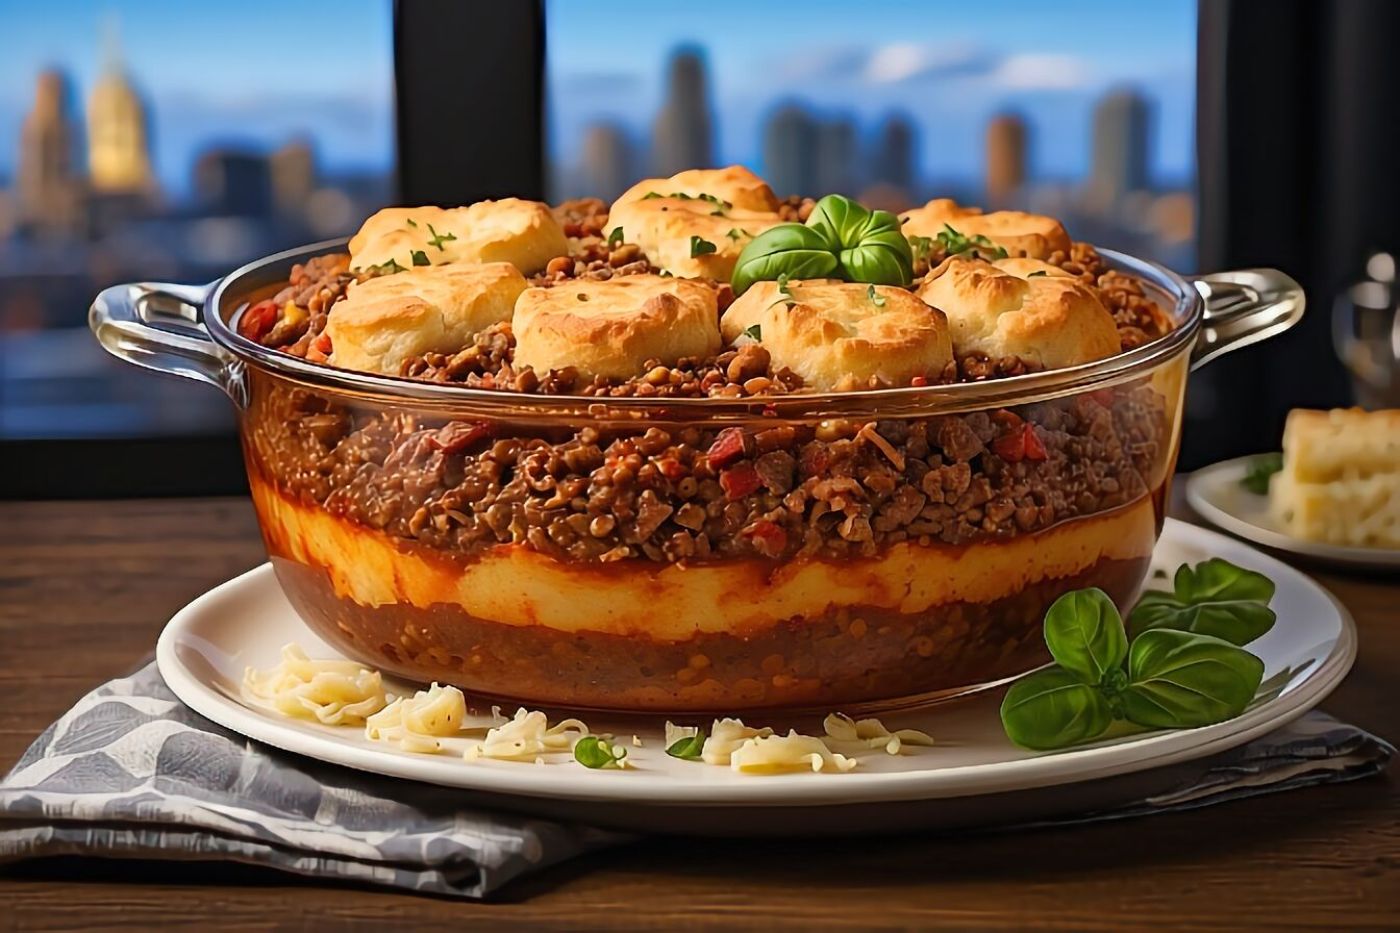 Italian Ground Beef Casserole with Biscuit Topping Recipe